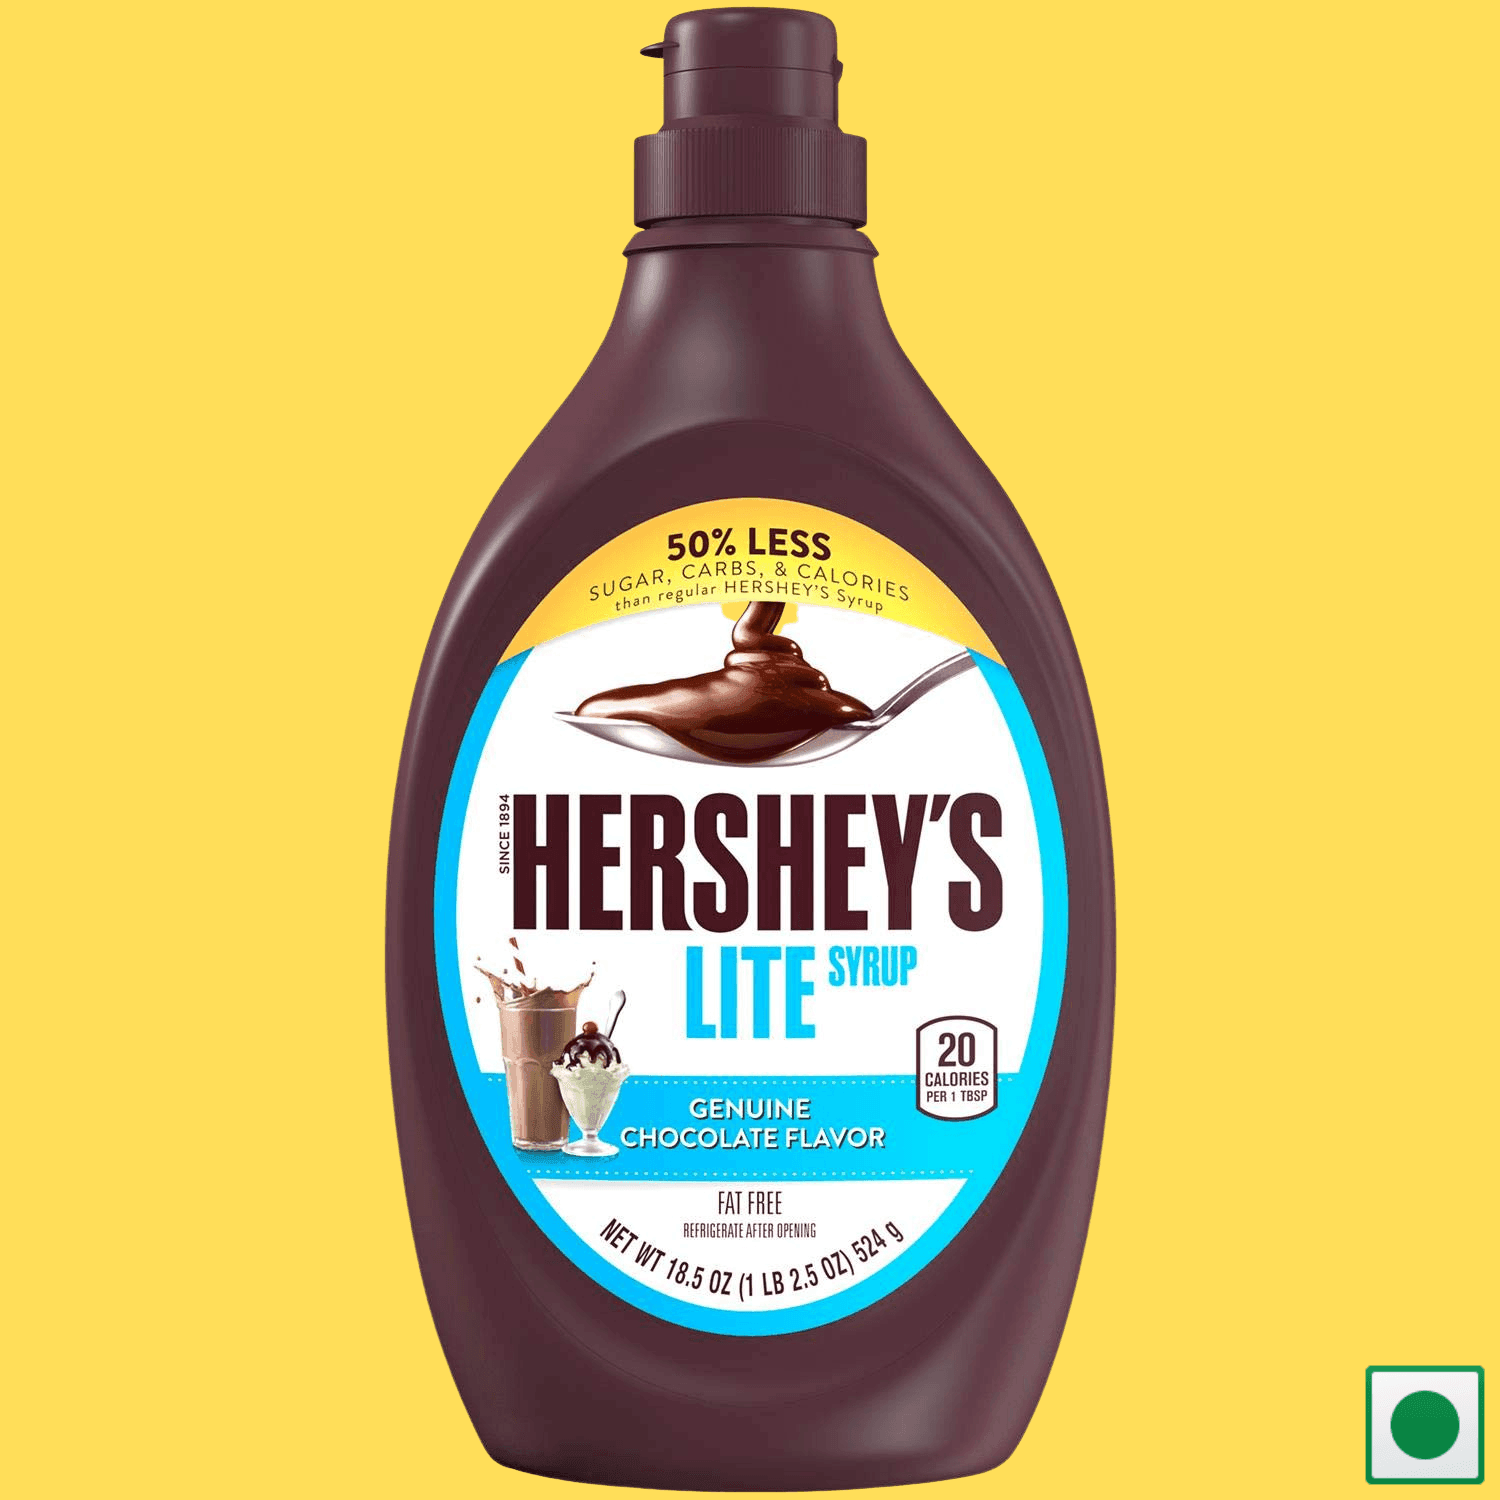 Hershey's Syrup Lite Genuine Chocolate Flavor, 524g (Imported) - Super 7 Mart